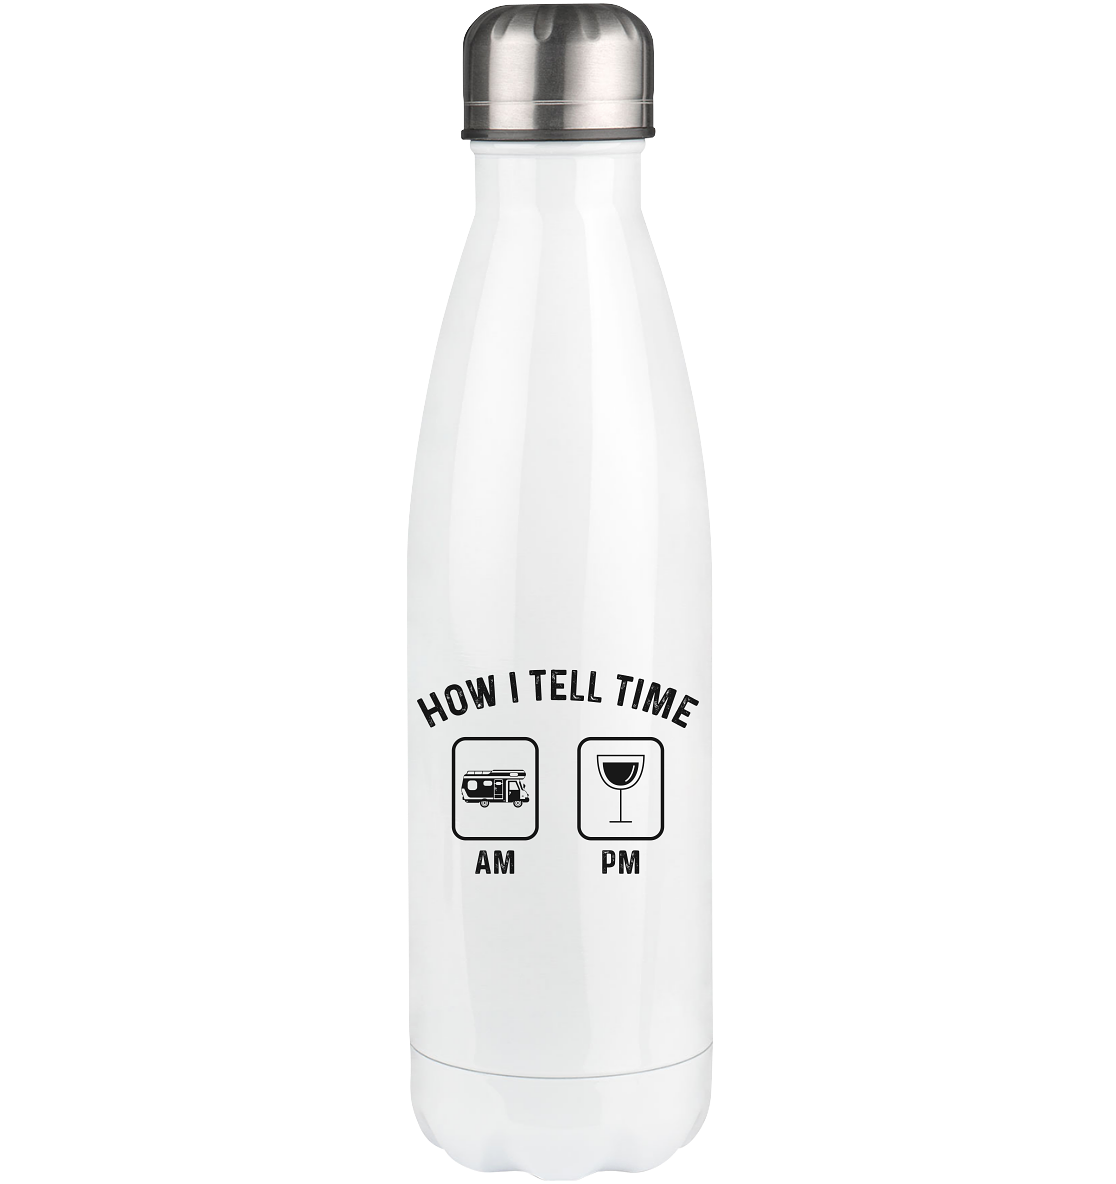 How I Tell Time Am Pm - Edelstahl Thermosflasche camping UONP 500ml